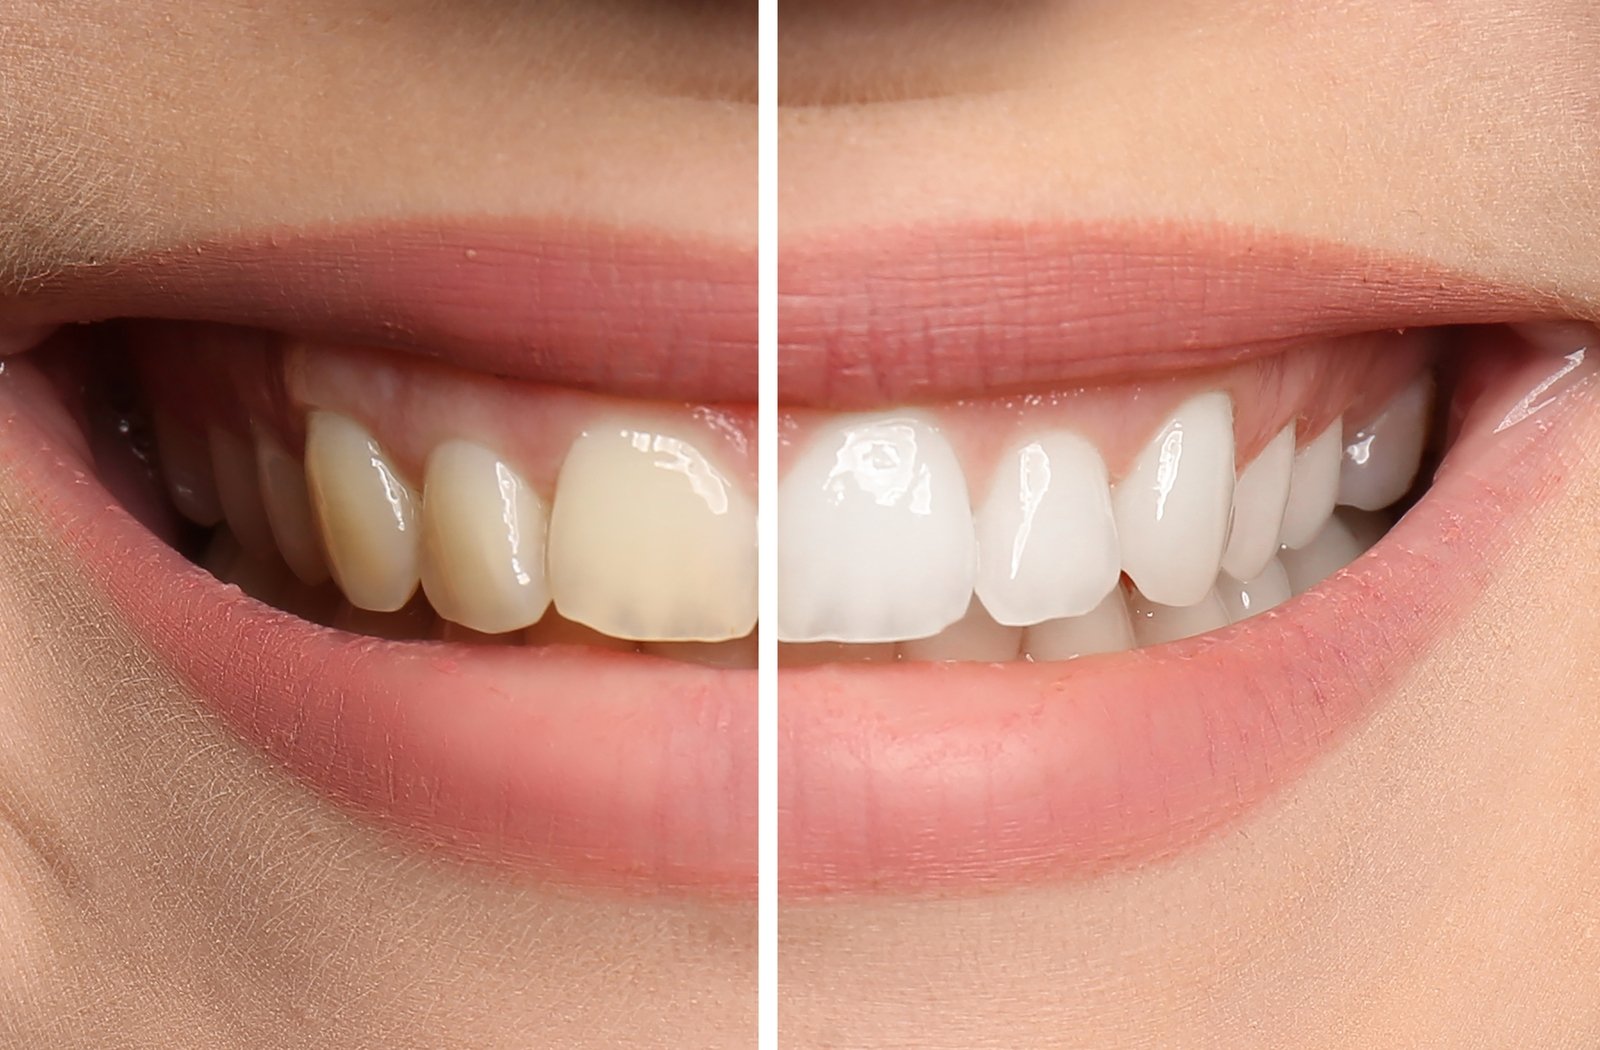 Can I Whiten My Teeth If I Have A History Of Sensitive Teeth?